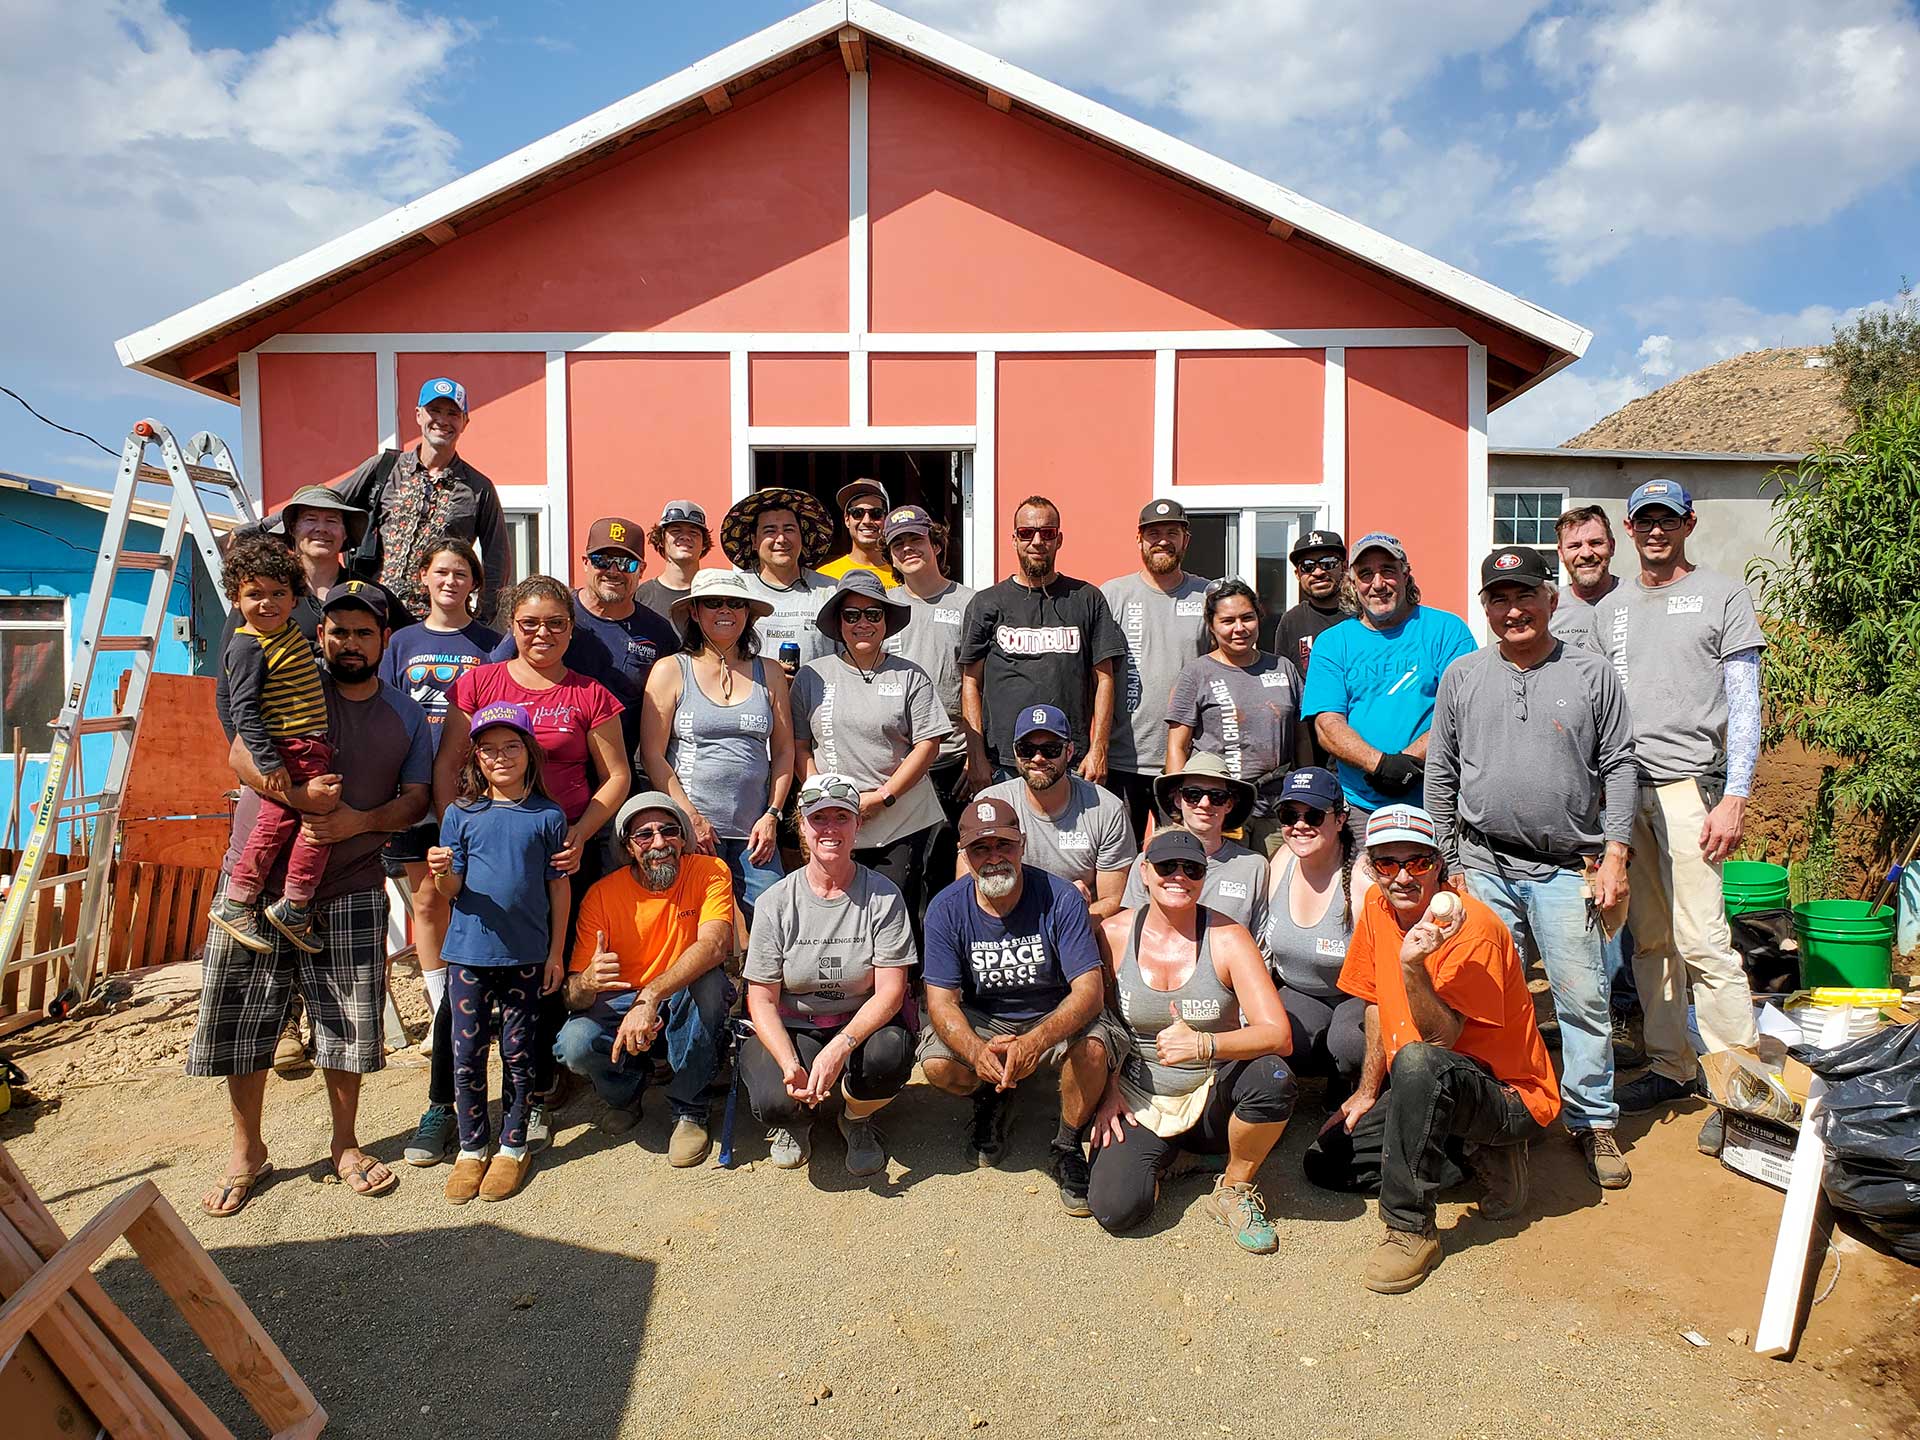 Group photo from the Baja Challenge event in 2022 including the family that the house was built for in Mexico